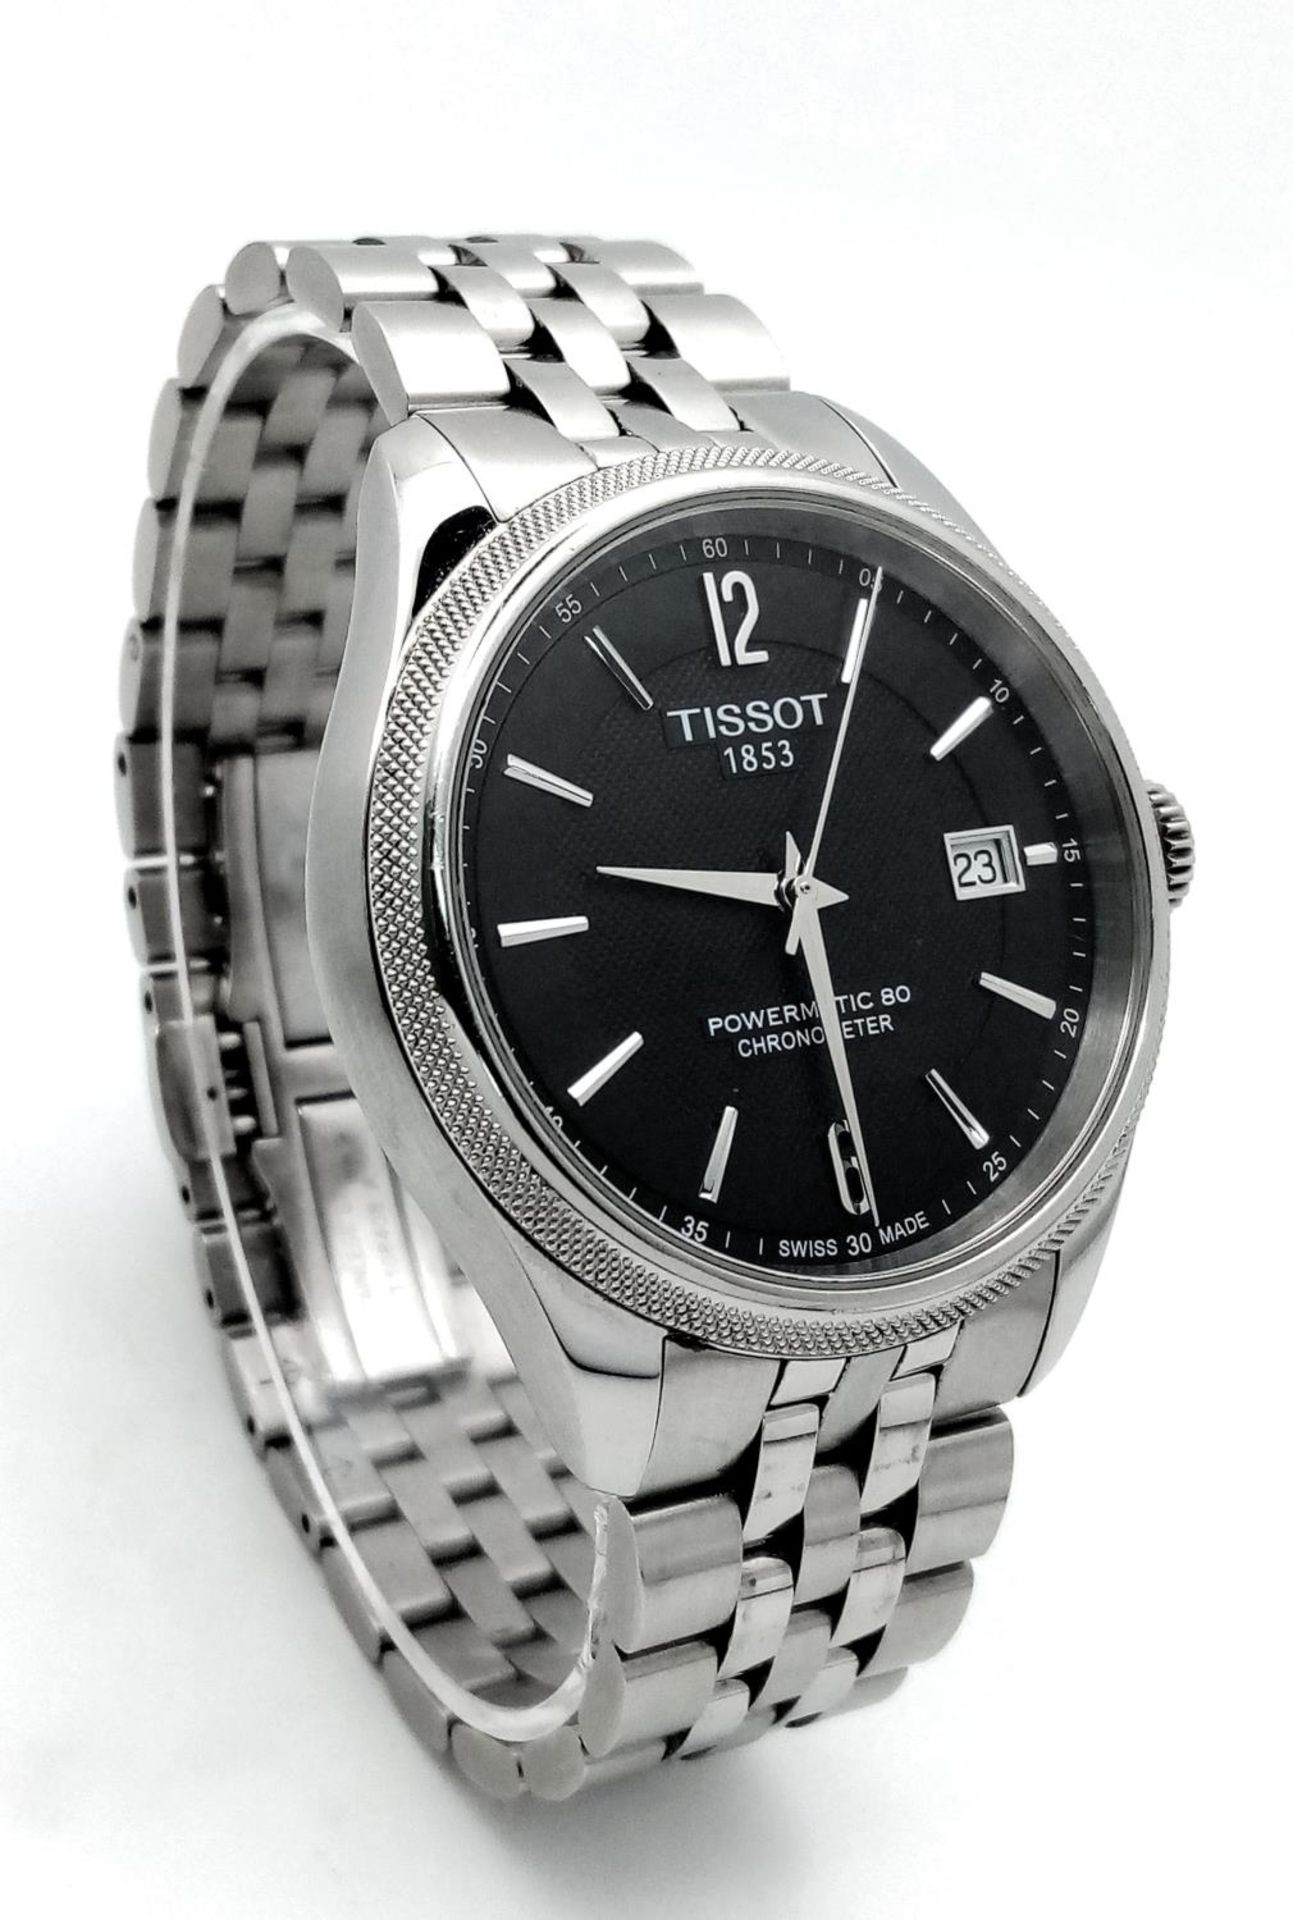 A Tissot Powermatic 80 Gents Watch. Stainless steel bracelet and case - 41mm. Black dial with date - Bild 7 aus 28